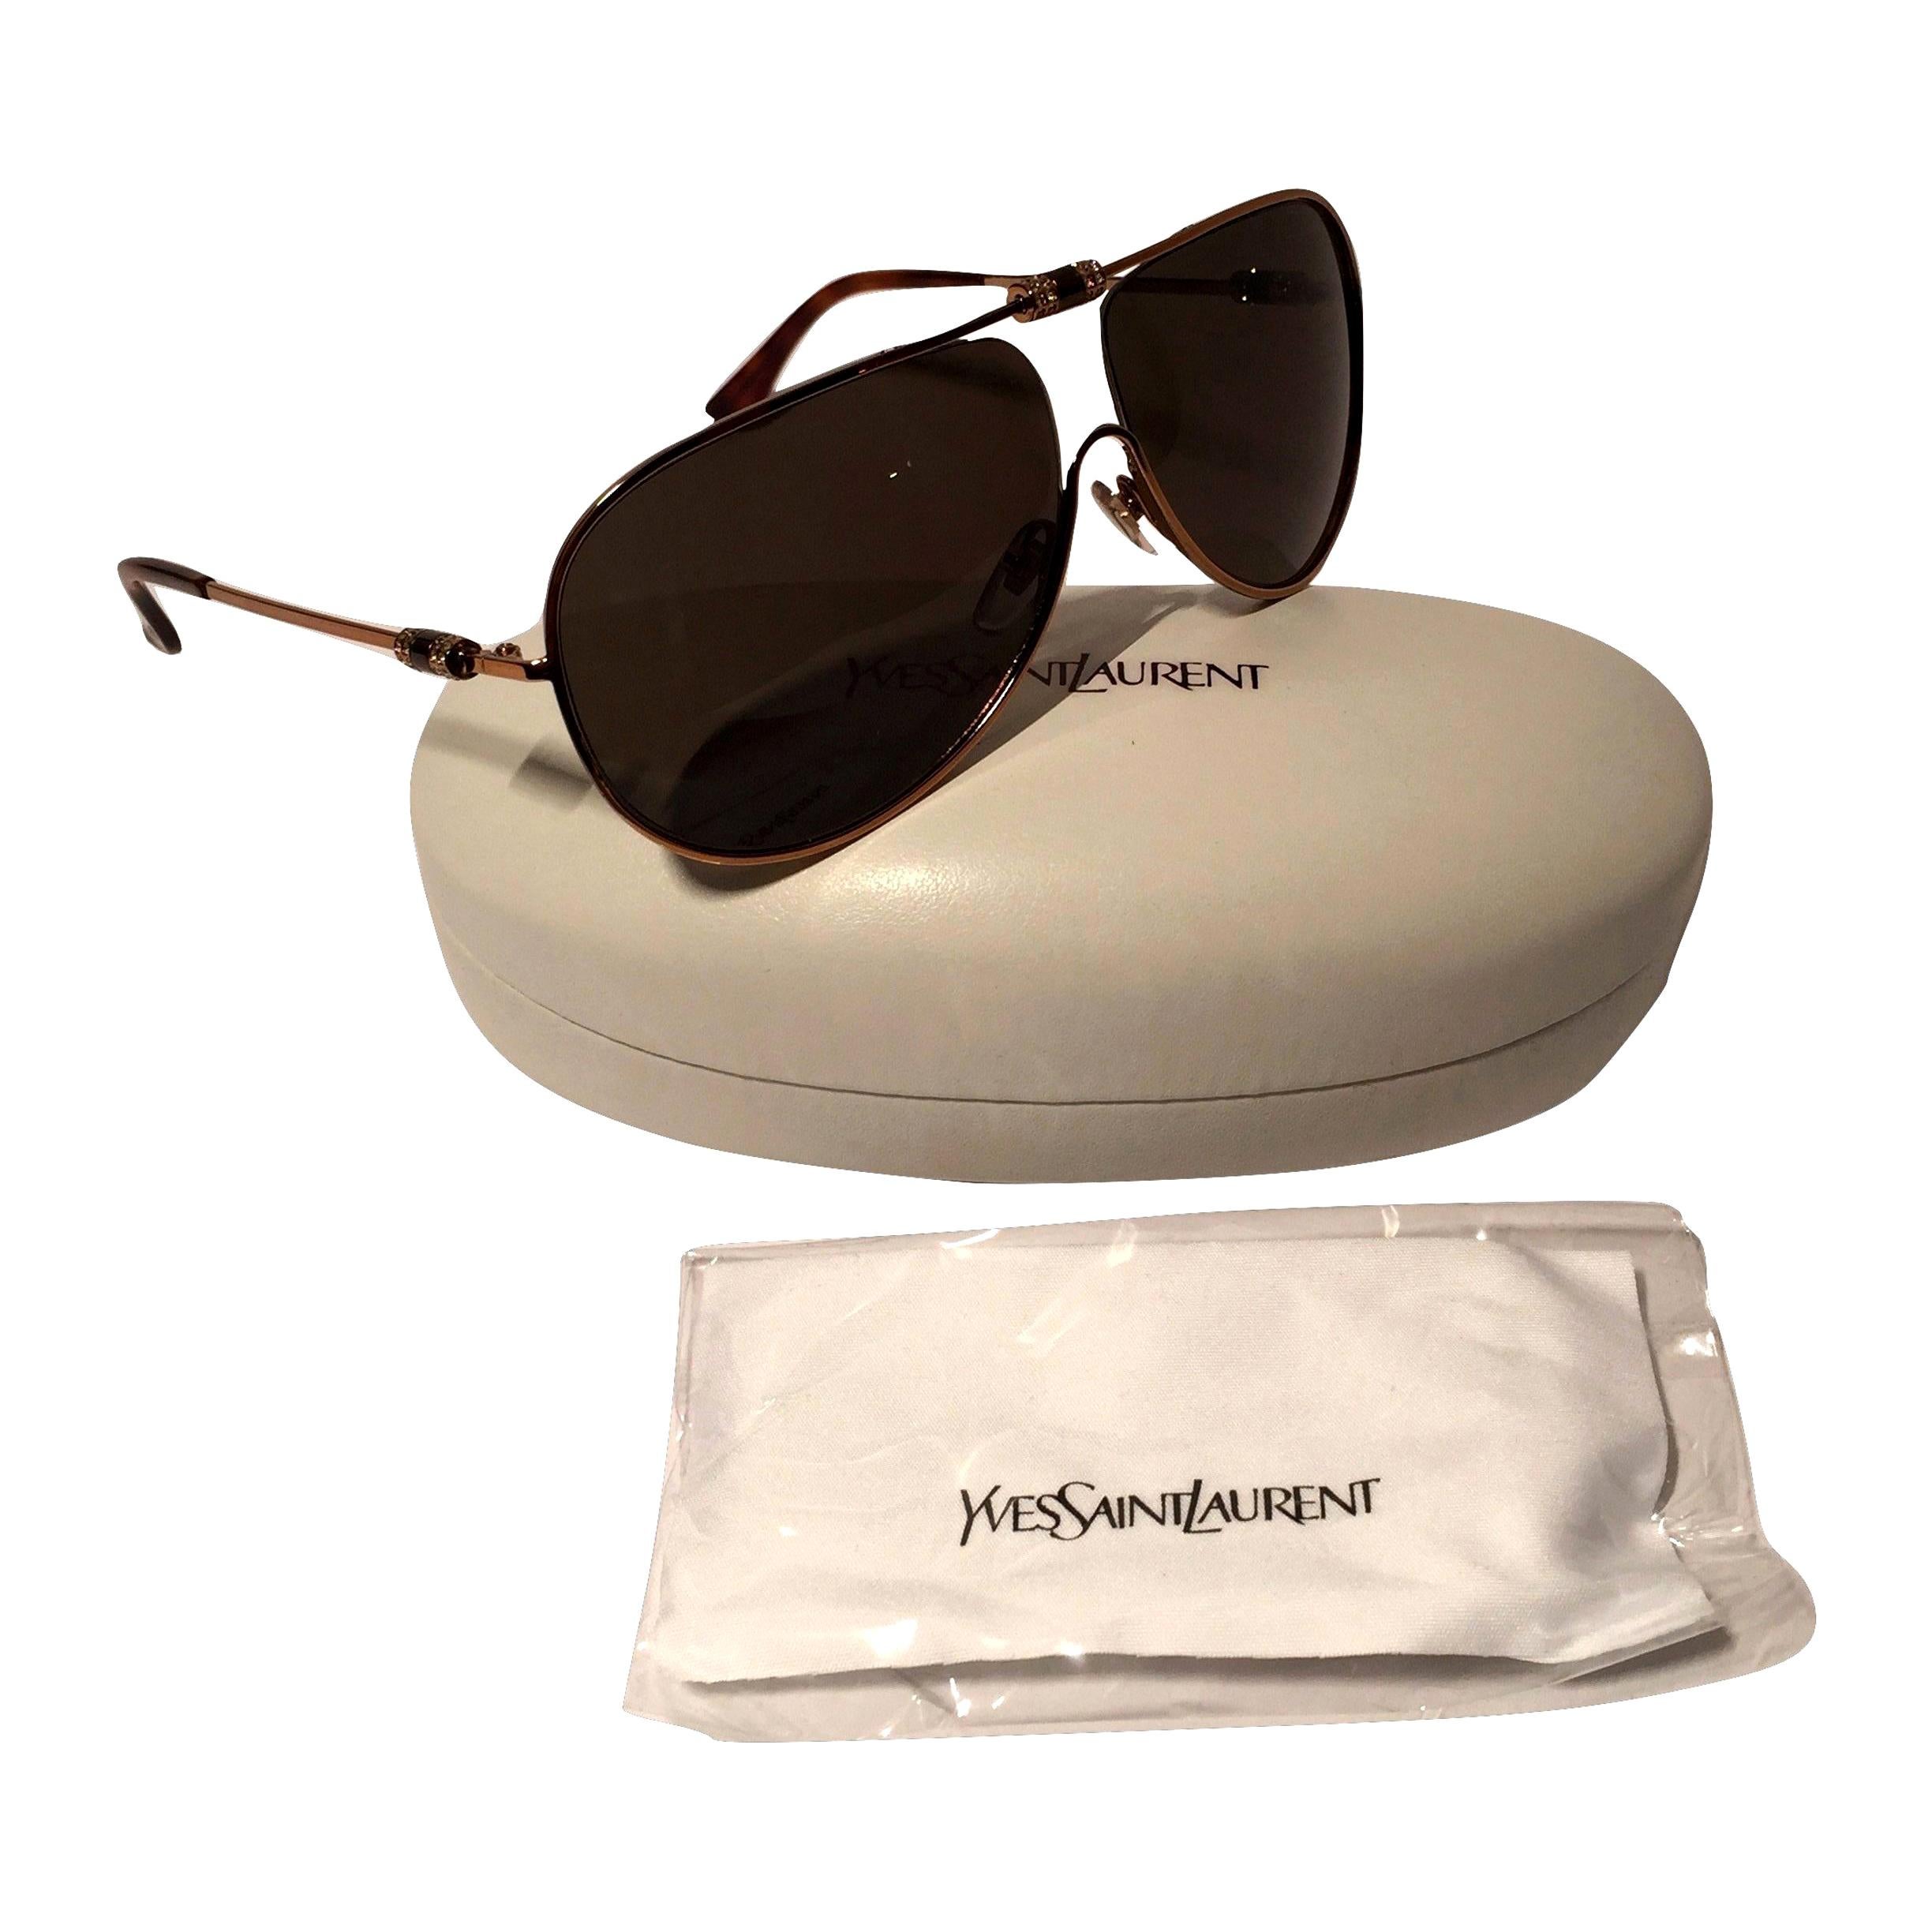 Yves Saint Laurent Sunglasses
Brand New
*Stunning in Bronze
* Crystal Front & Sides
* Lightweight
* YSL at Temple
* Made in Italy
* 100% UVA/UVB Protection
* Comes with Case, Cleaning Cloth & Tag